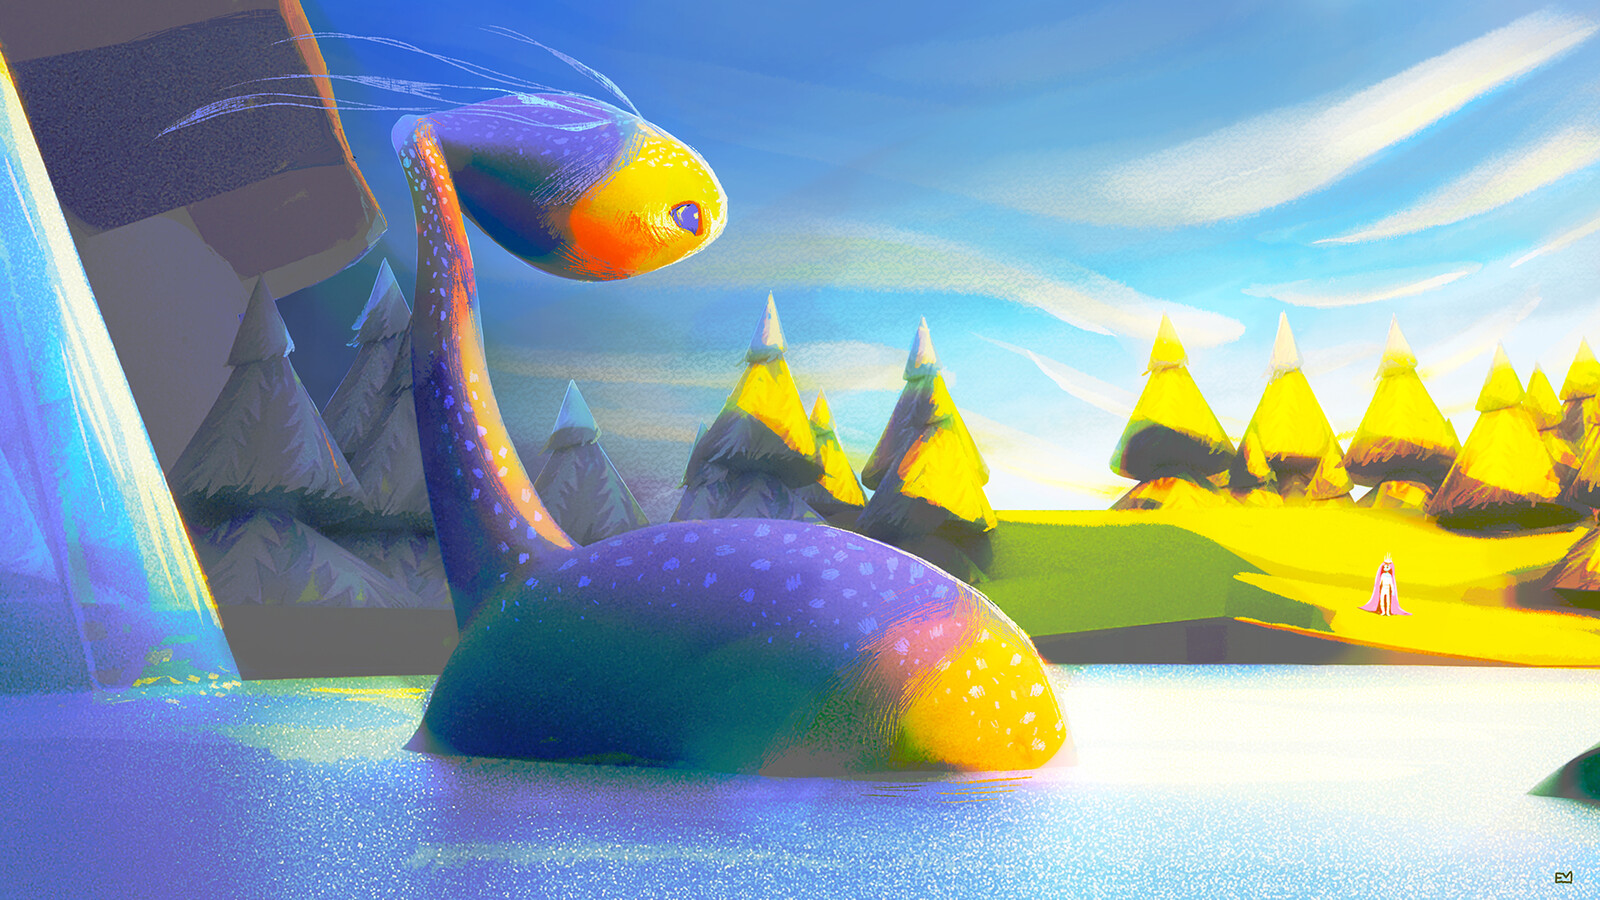 The lake monster - 01 - Overpainting